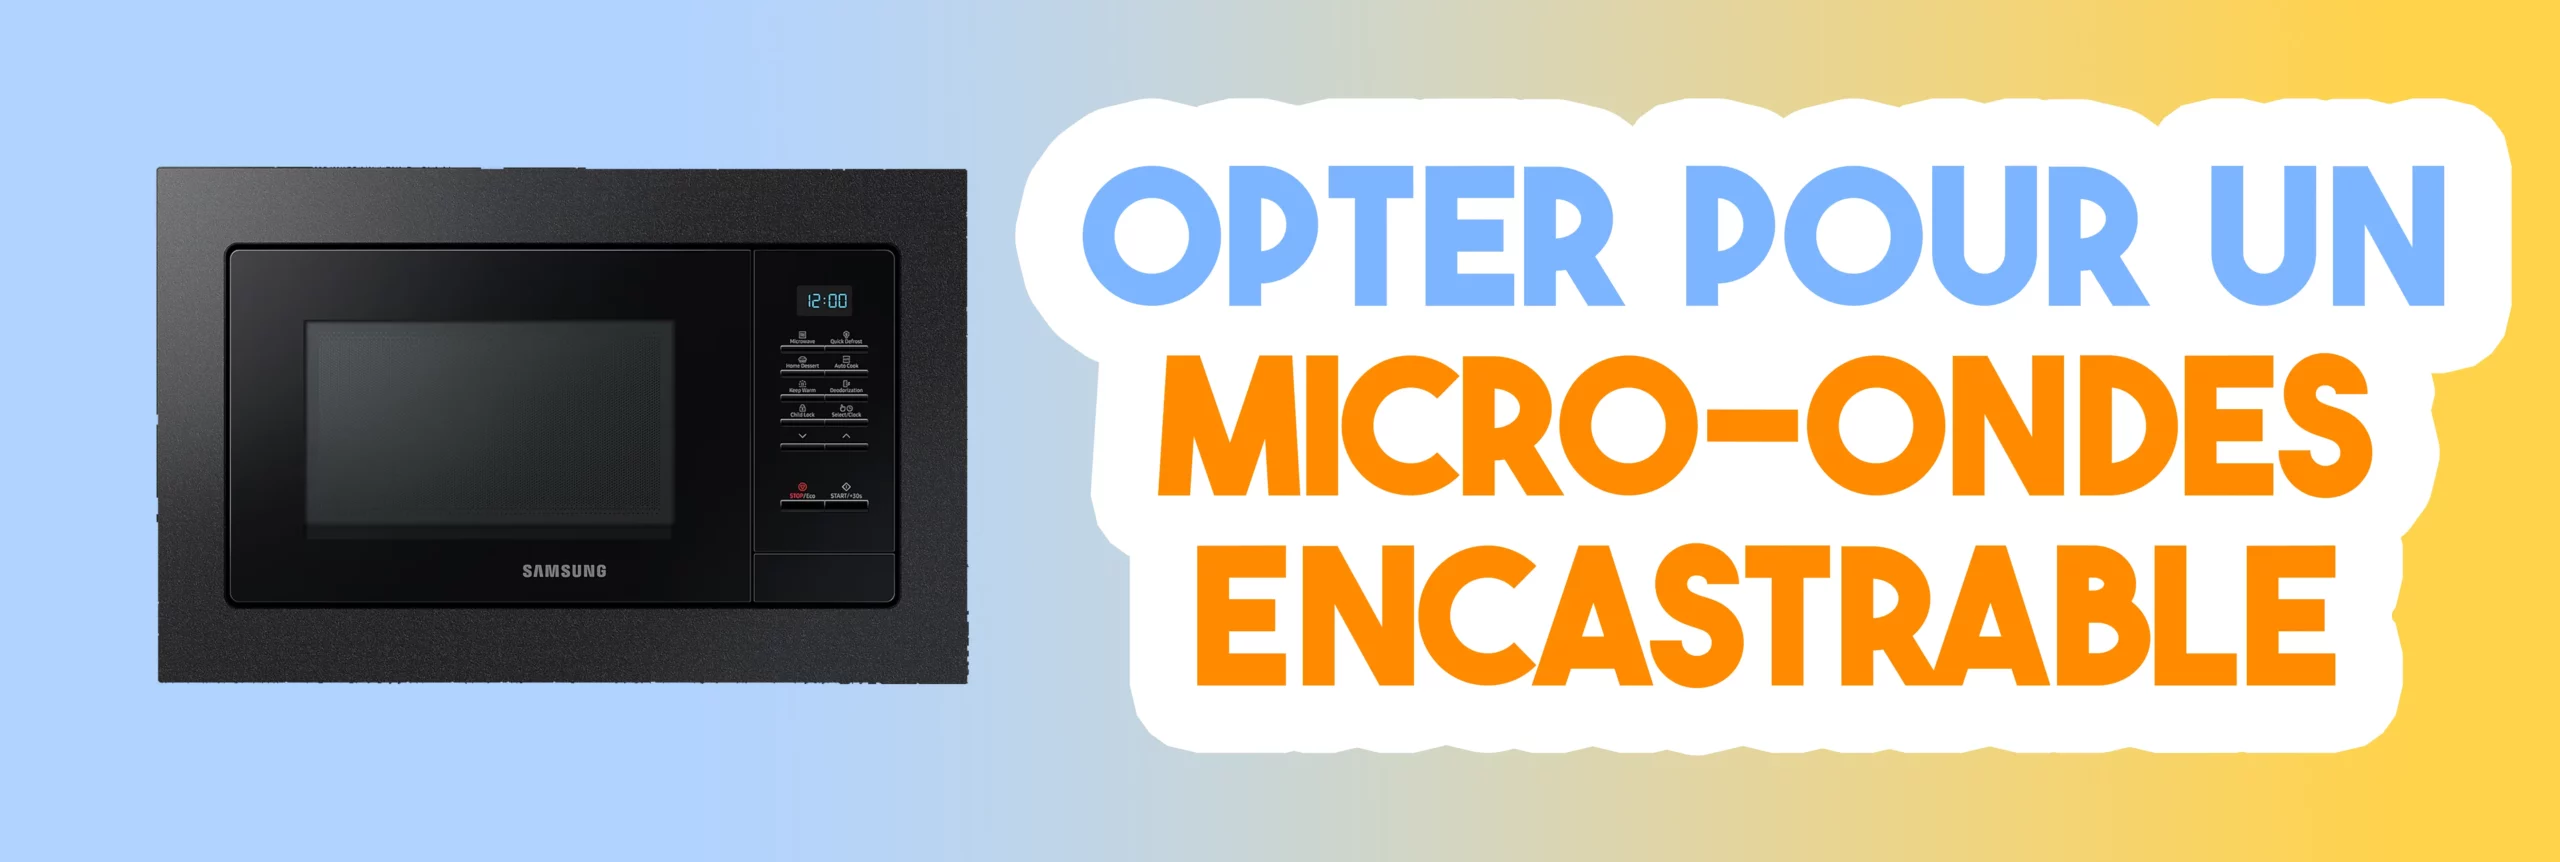 Opter Micro-ondes encastrable